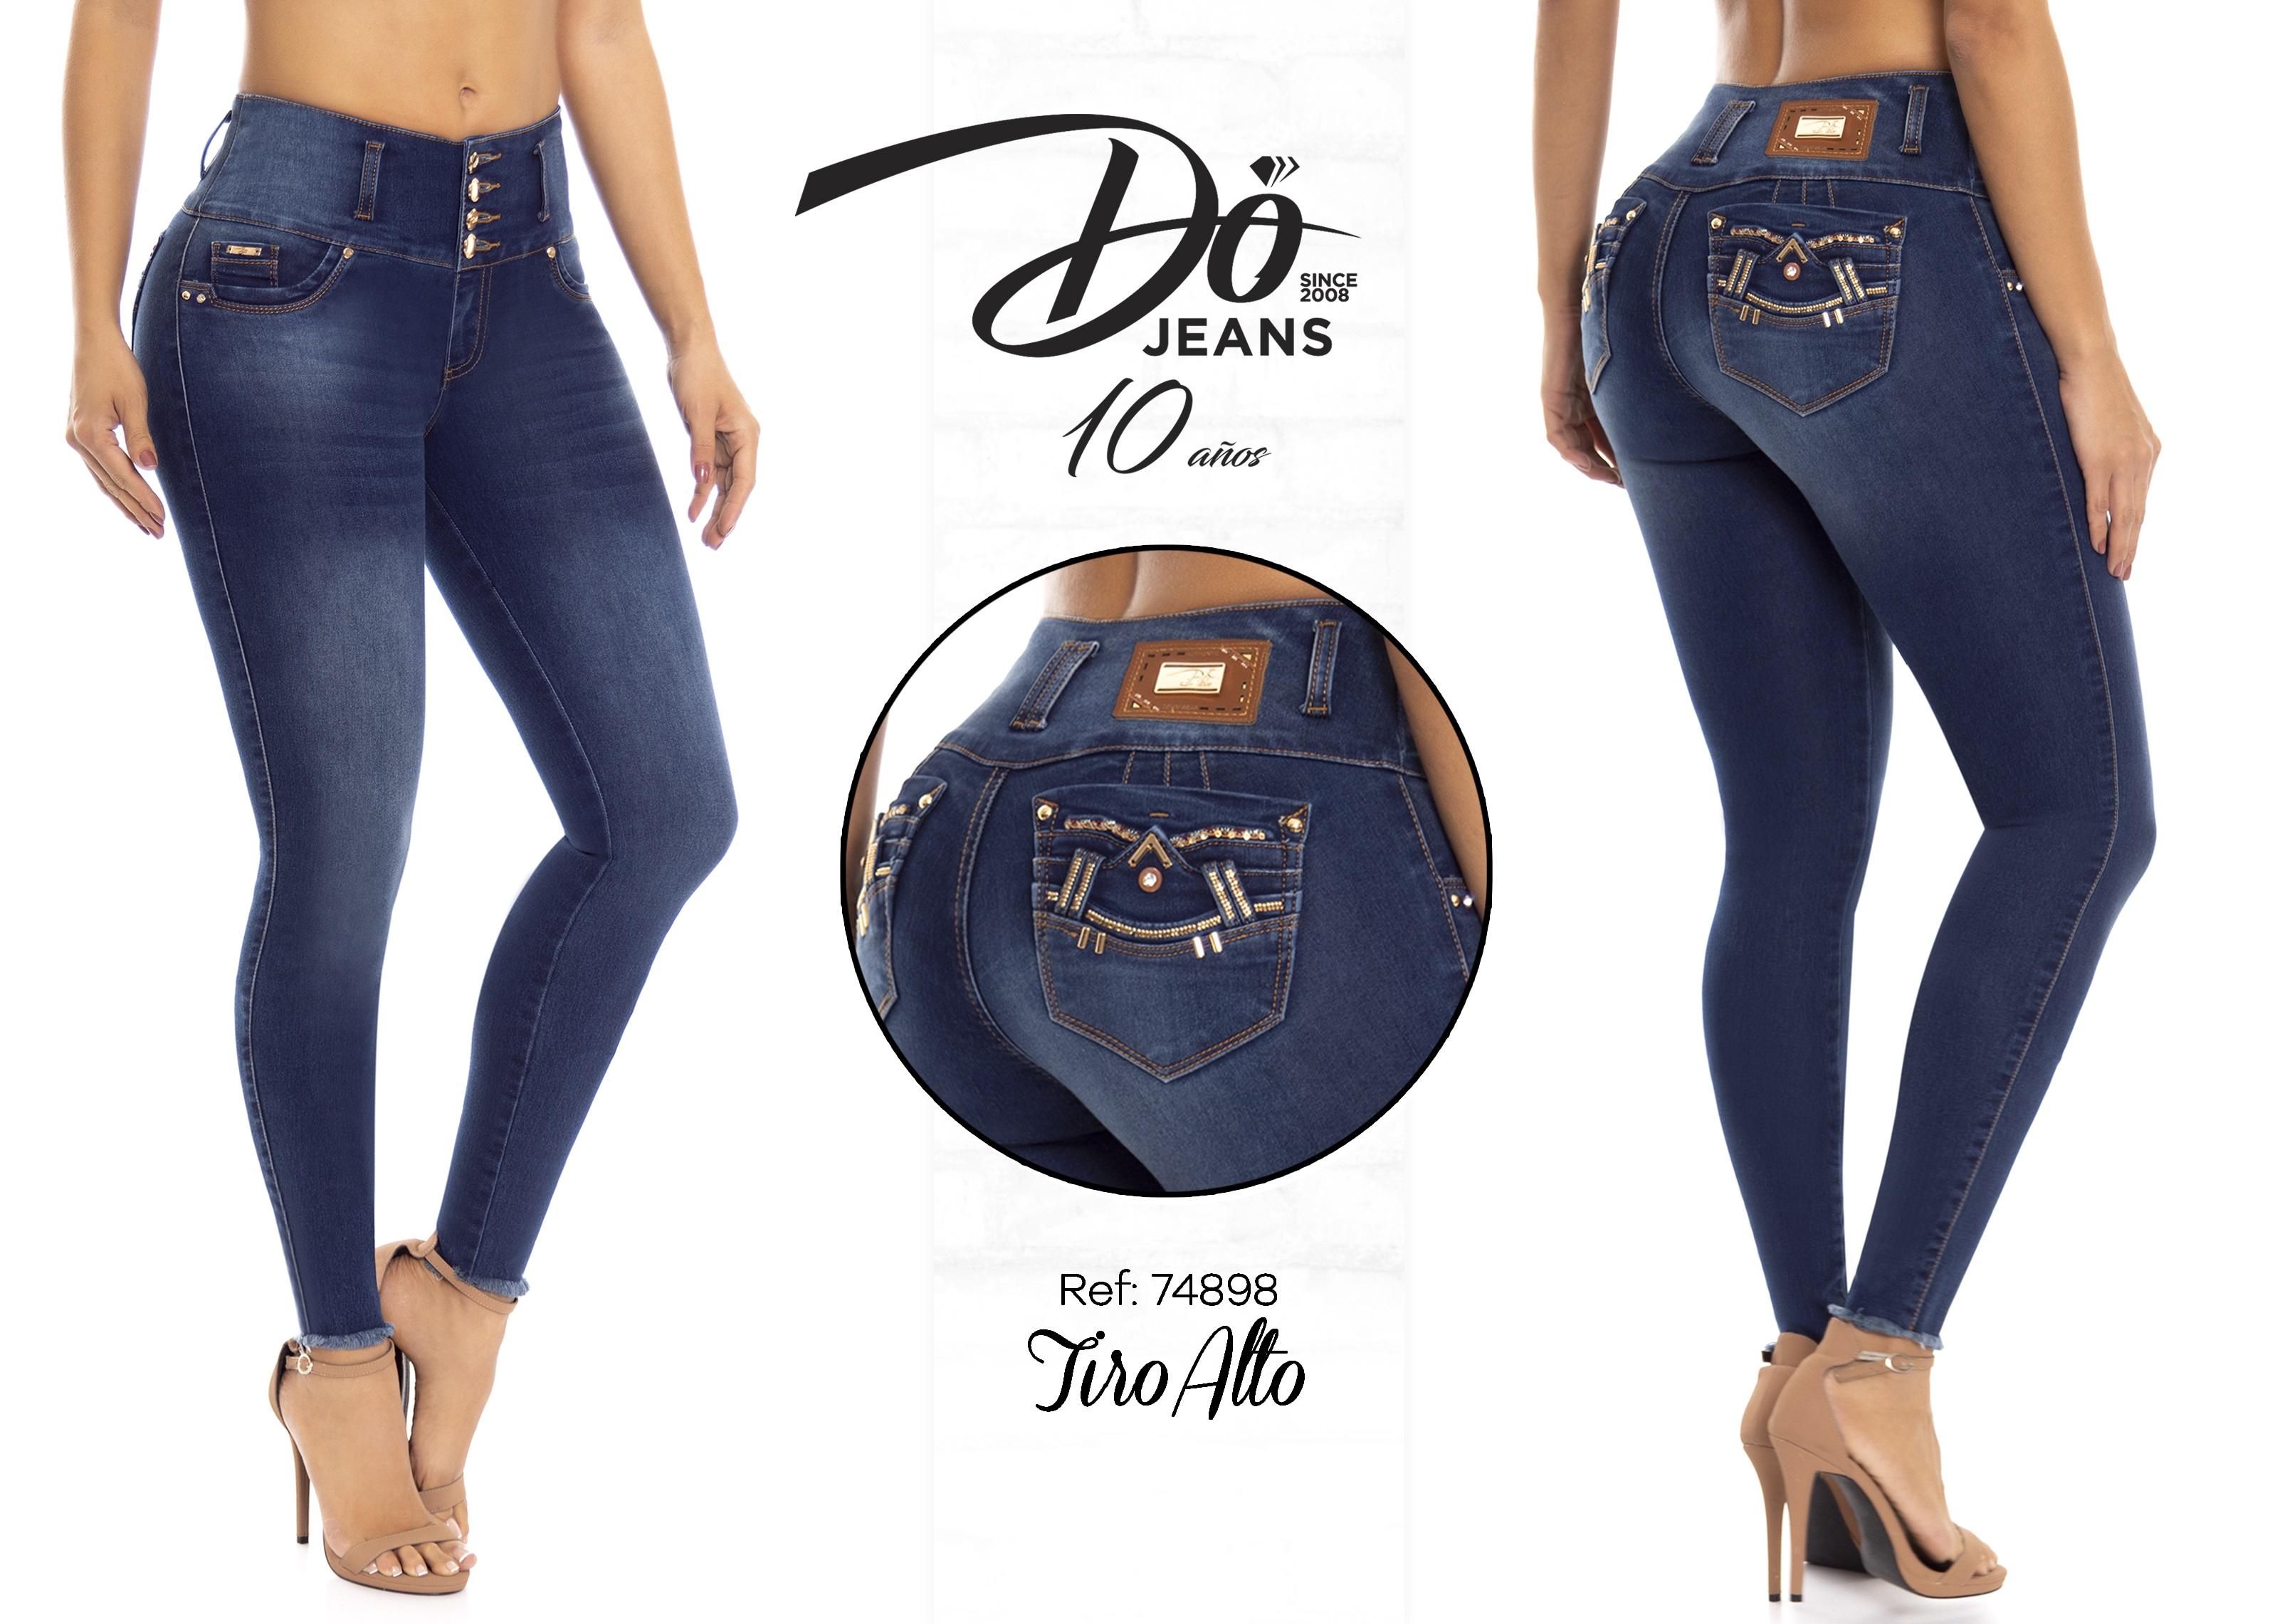 Jeans Levantacola Colombiano - Ref. 248 -74898 D